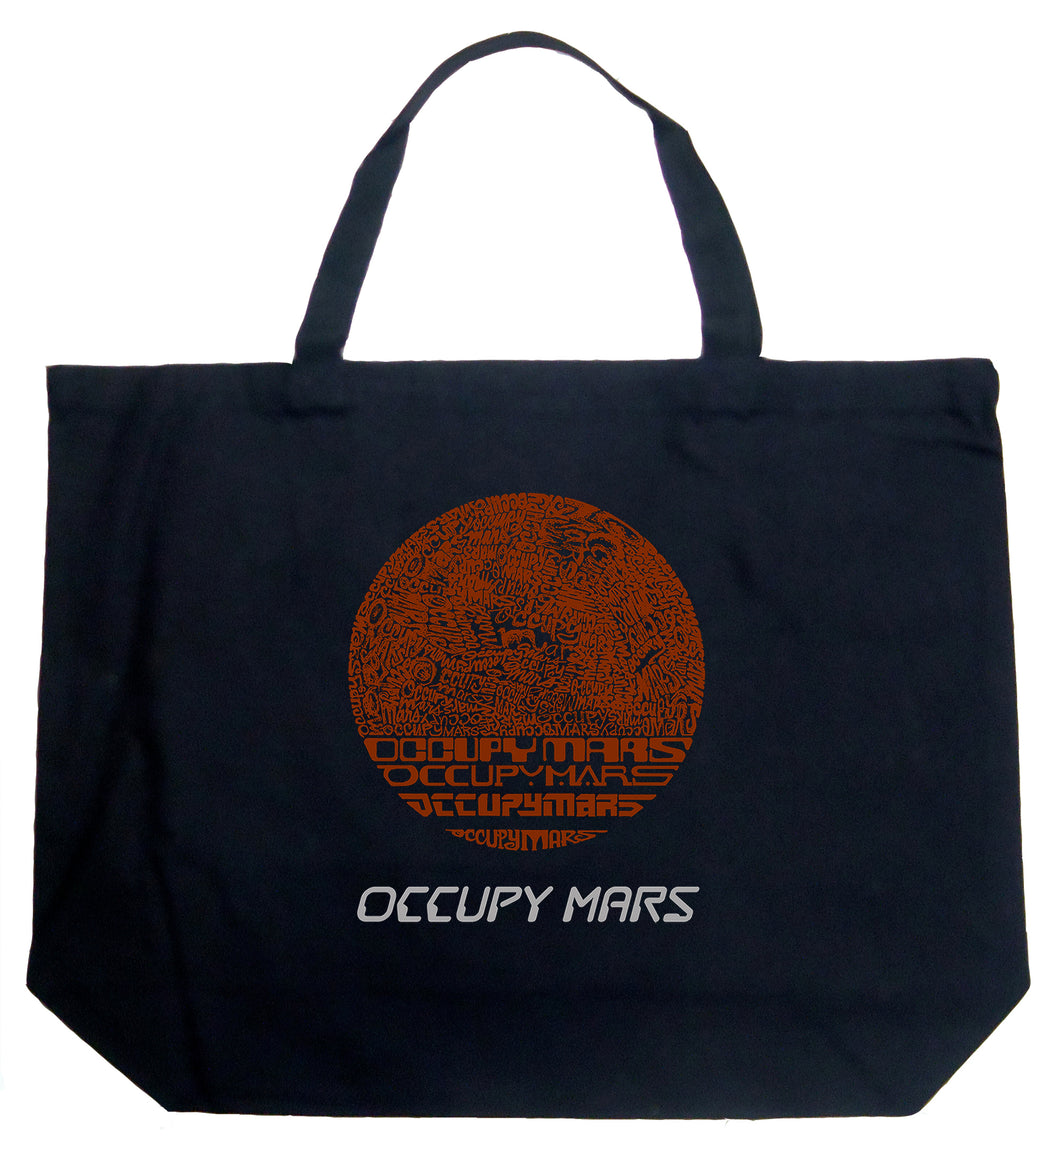 Occupy Mars - Large Word Art Tote Bag